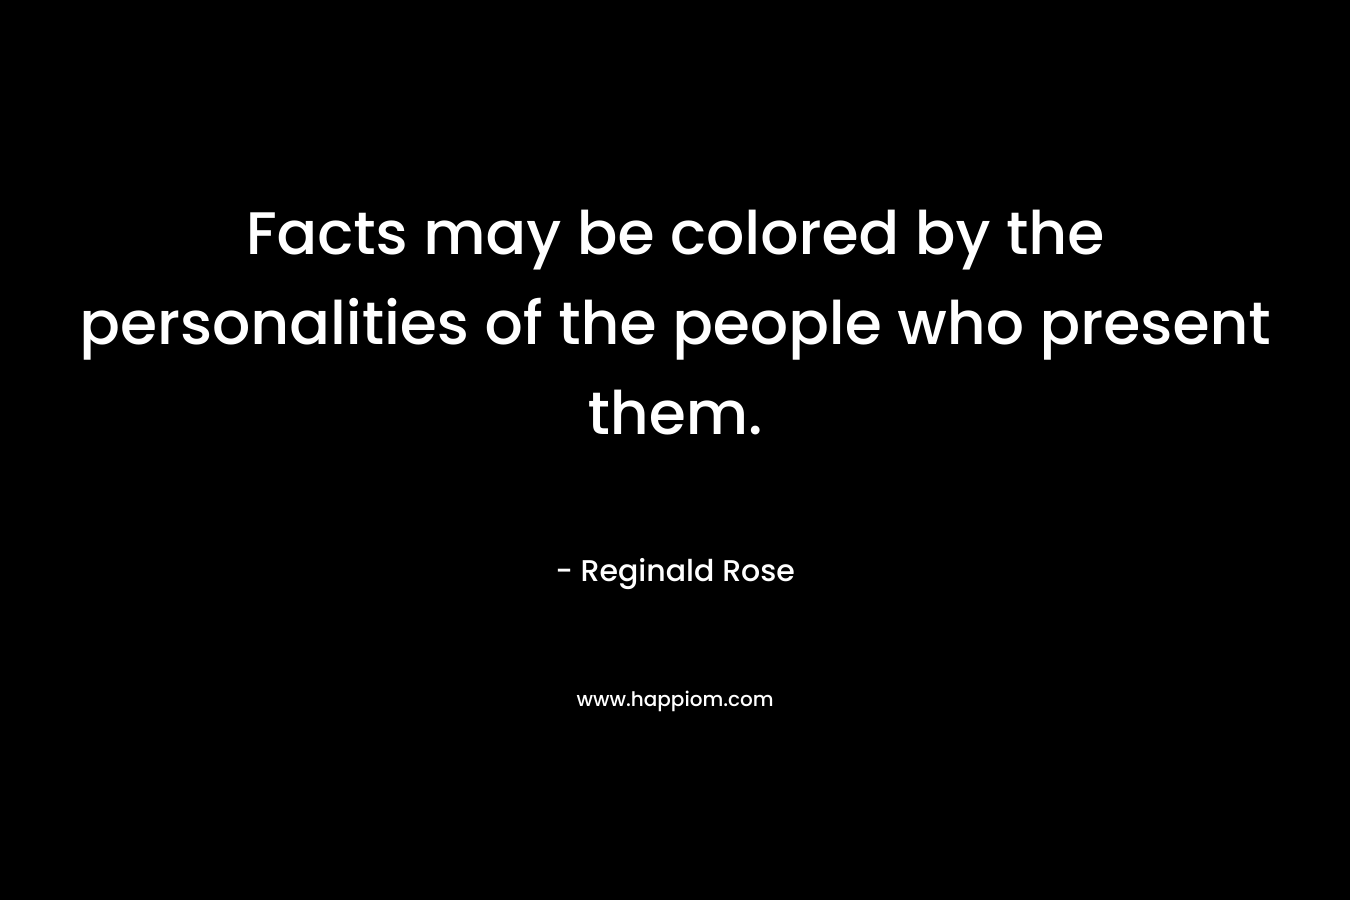 Facts may be colored by the personalities of the people who present them. – Reginald Rose